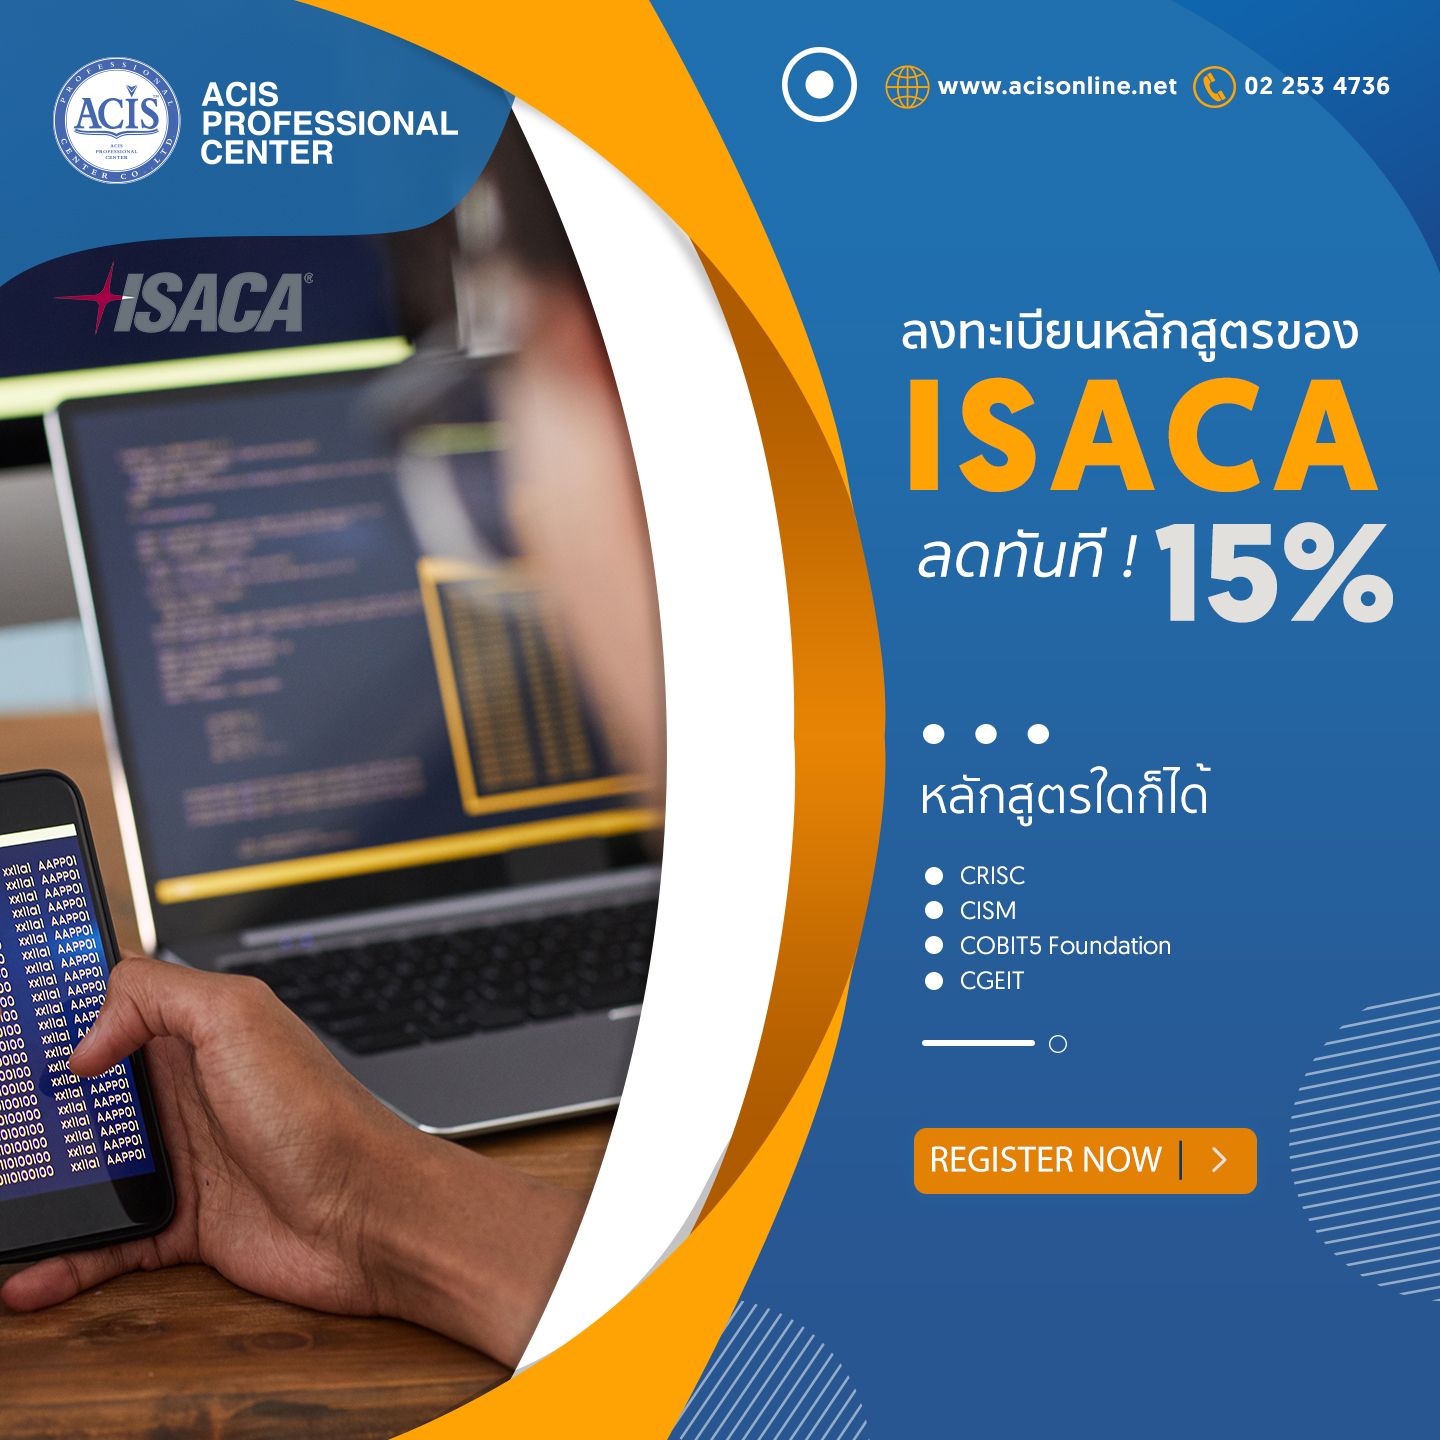 Promotion ISACA Package